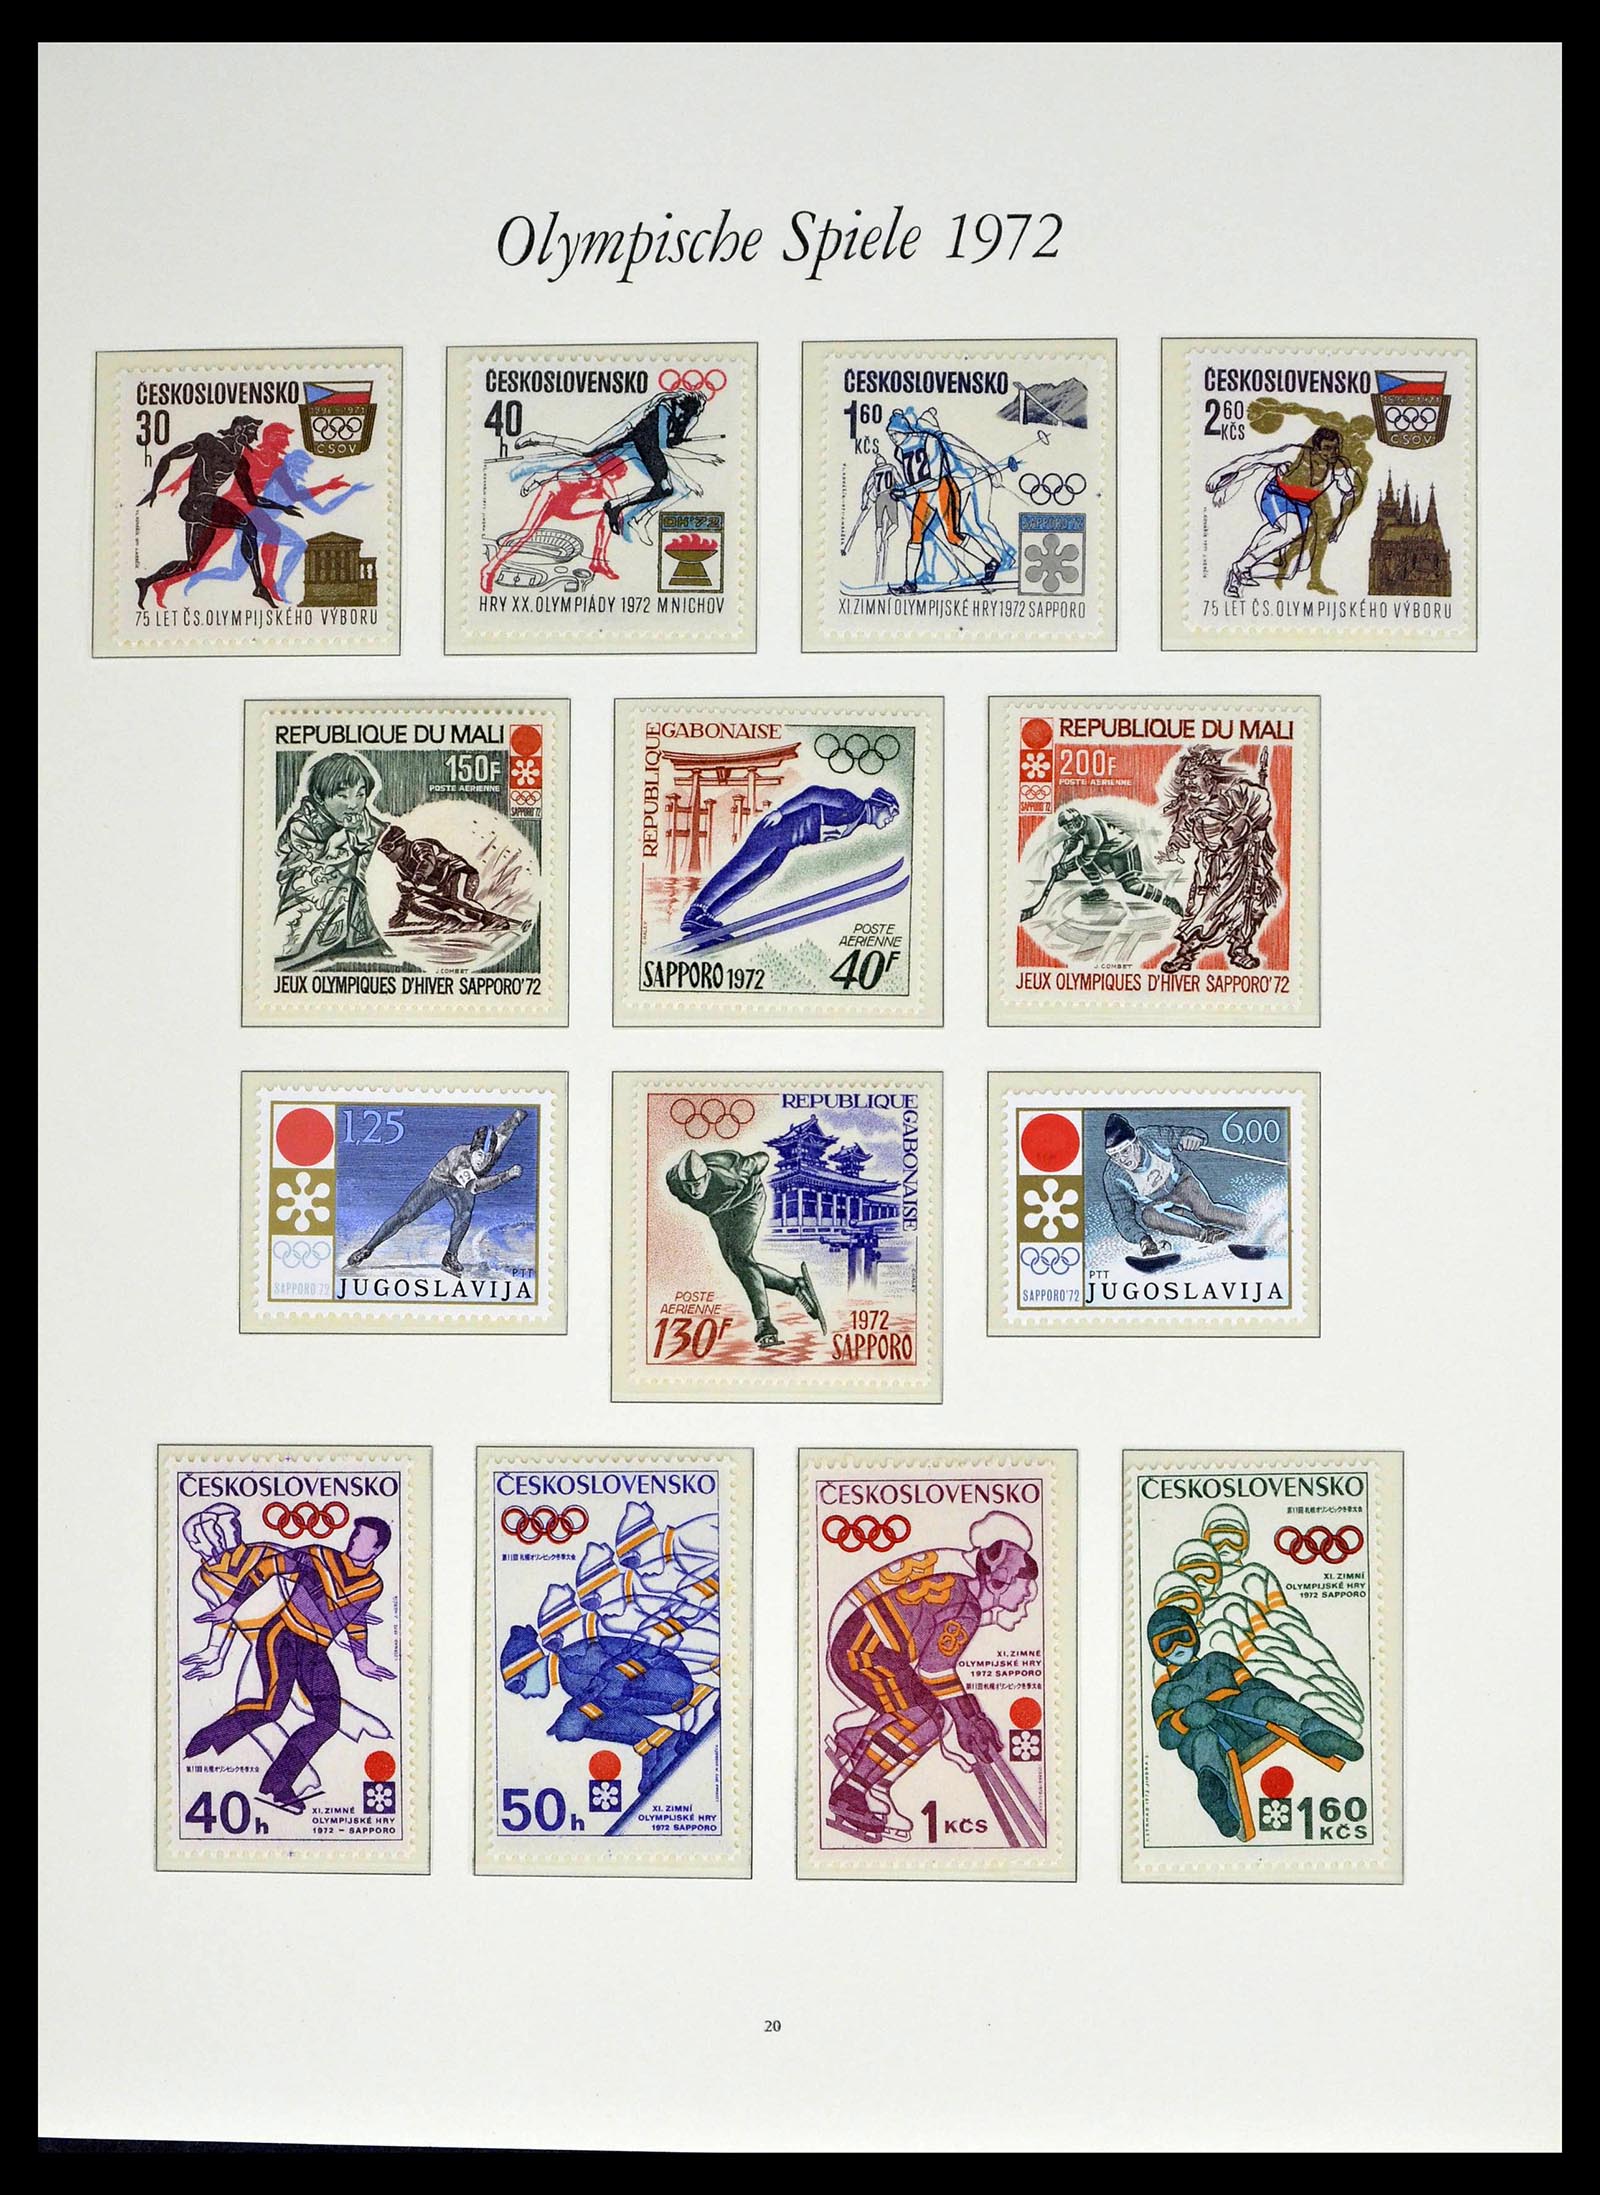 39237 0080 - Stamp collection 39237 Olympics 1972.